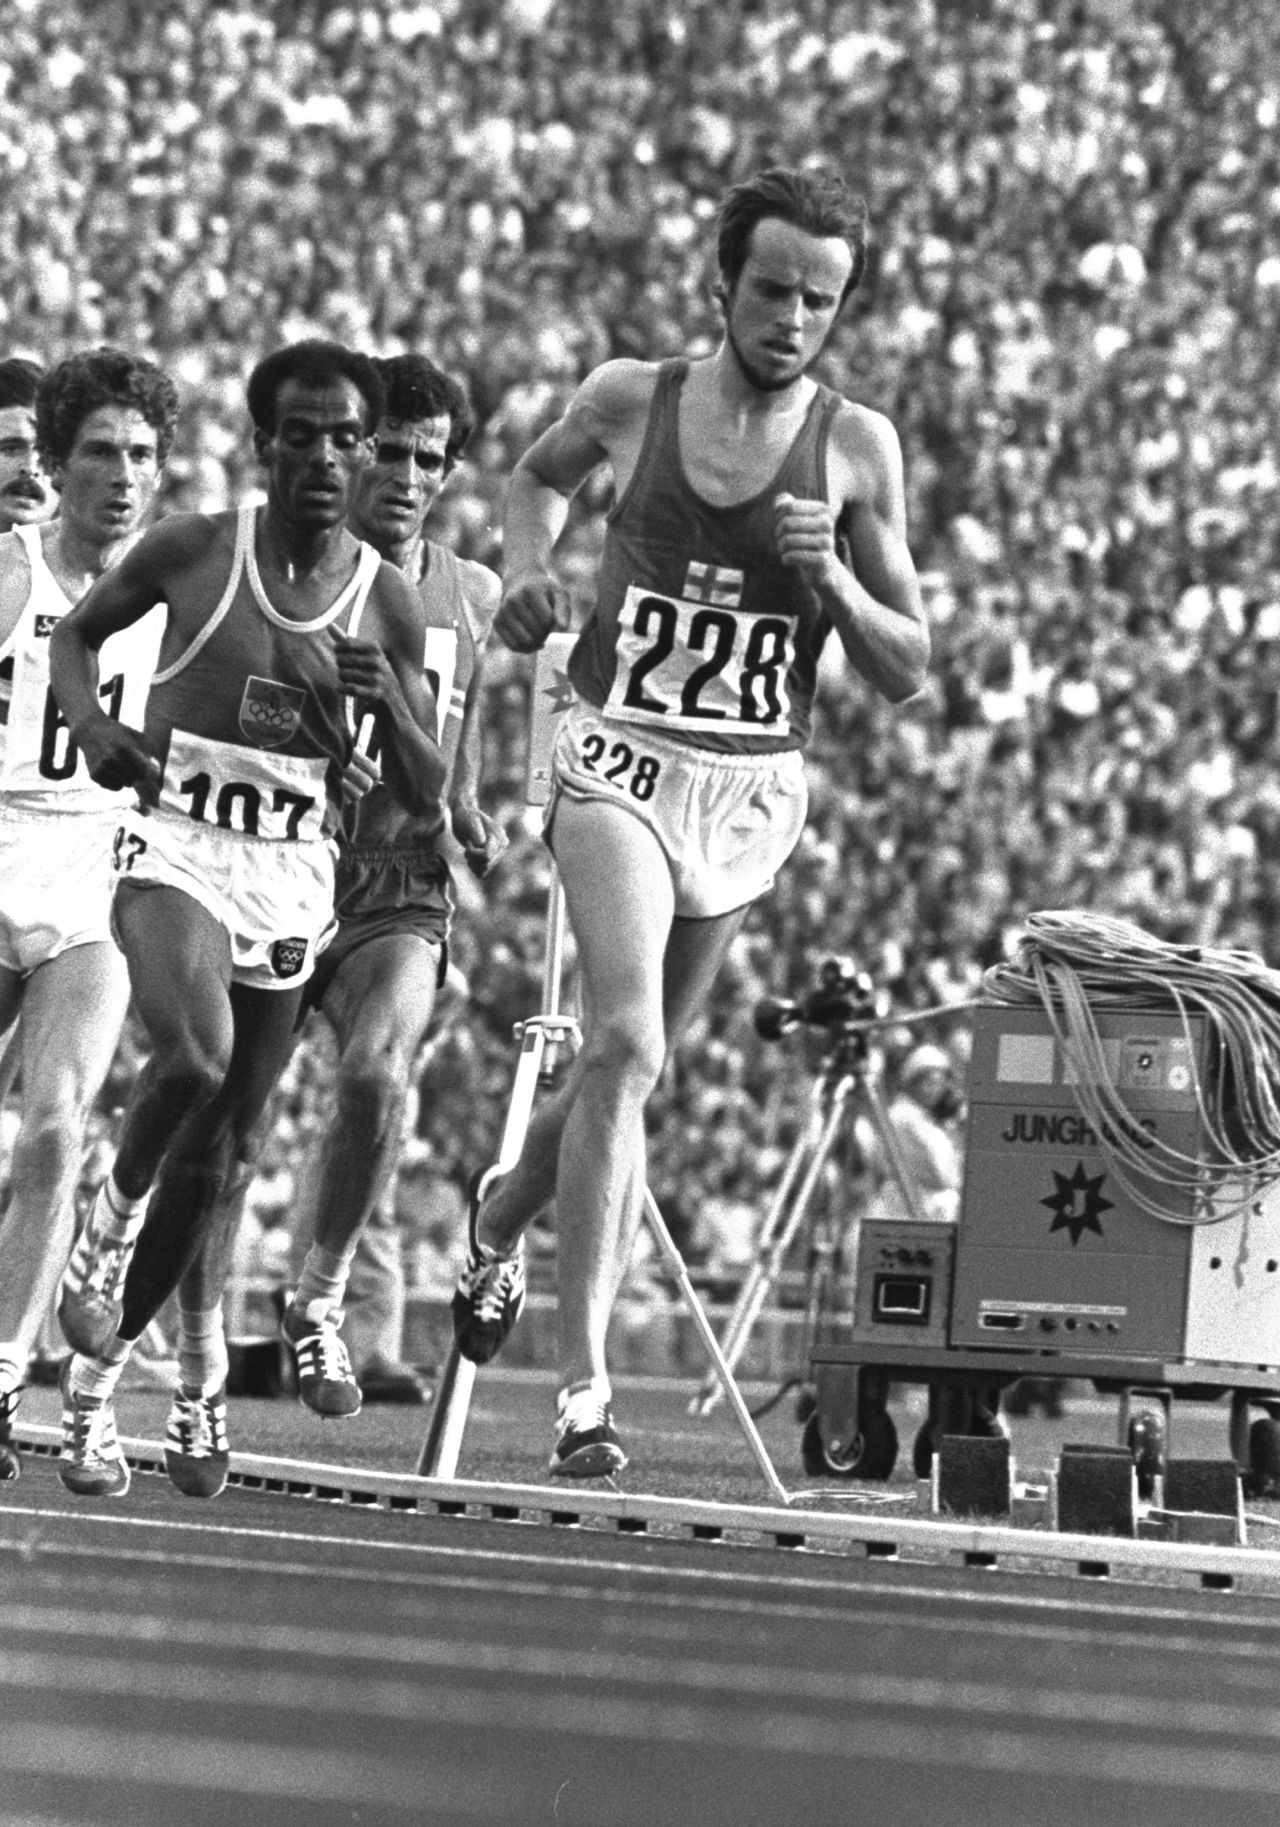 Lasse Viren literally picked himself up off the floor to complete his famous comeback at the 1972 Olympic Games. The Finnish runner won gold in the 10,000 meters -- and broke the world record too -- after falling over on the 12th lap of the race.